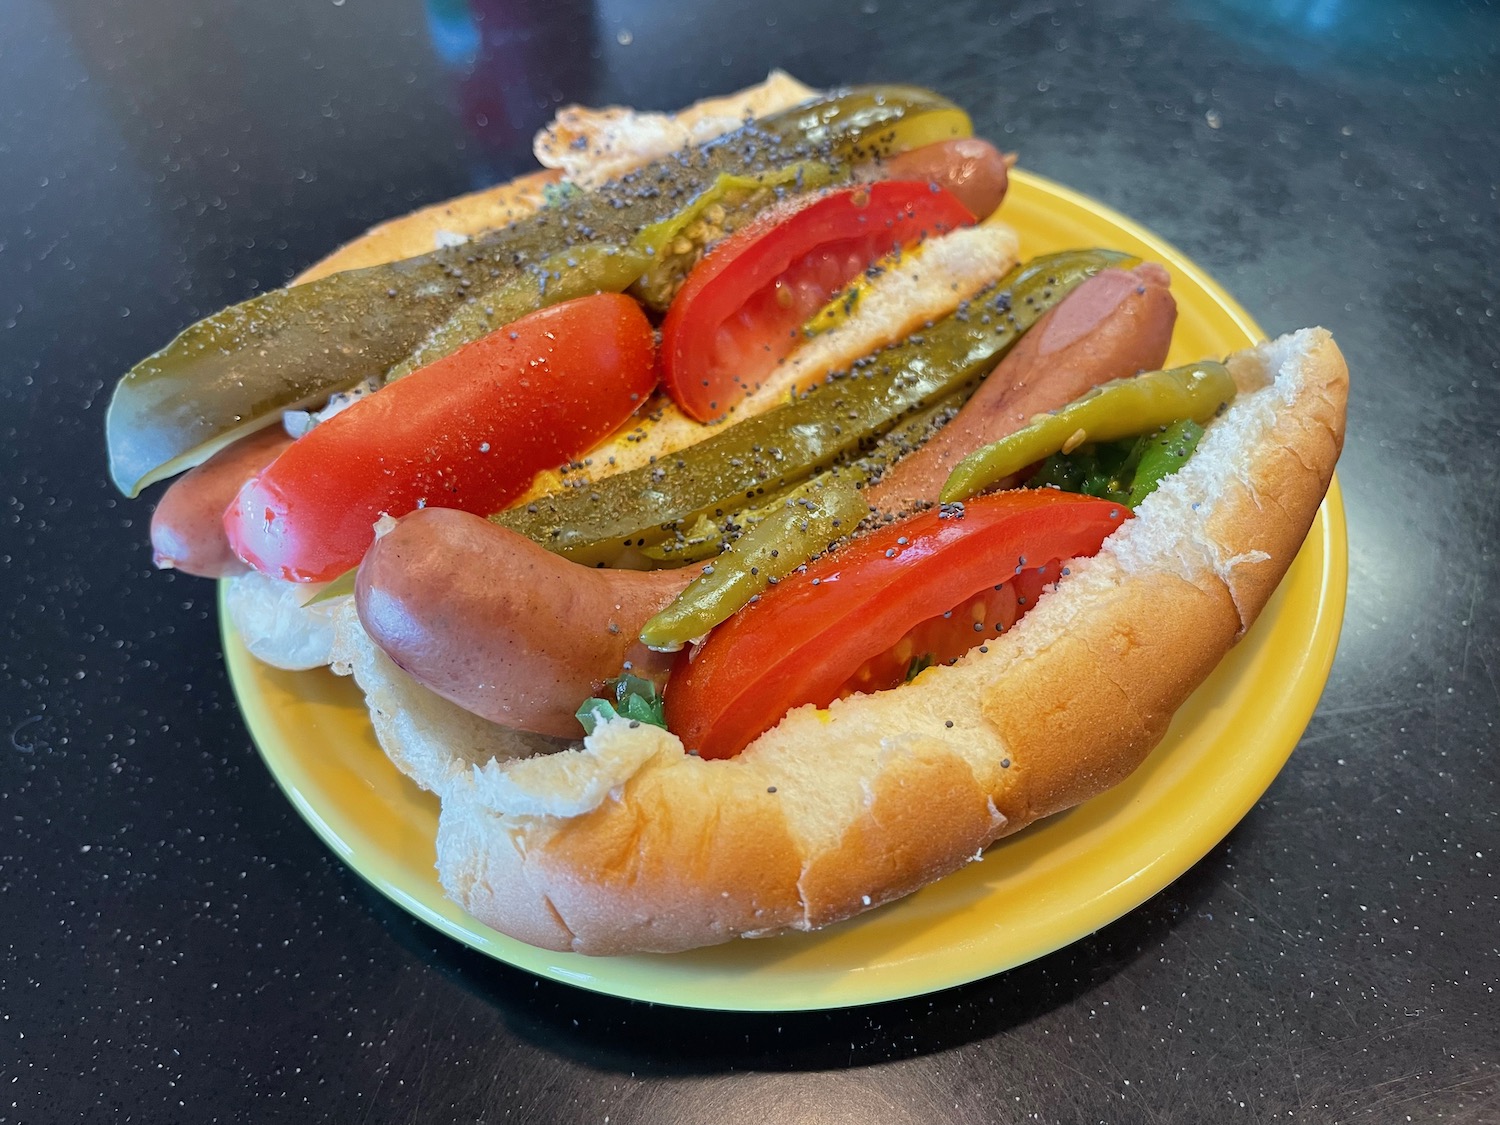 a hot dog with tomatoes and pickles on a yellow plate